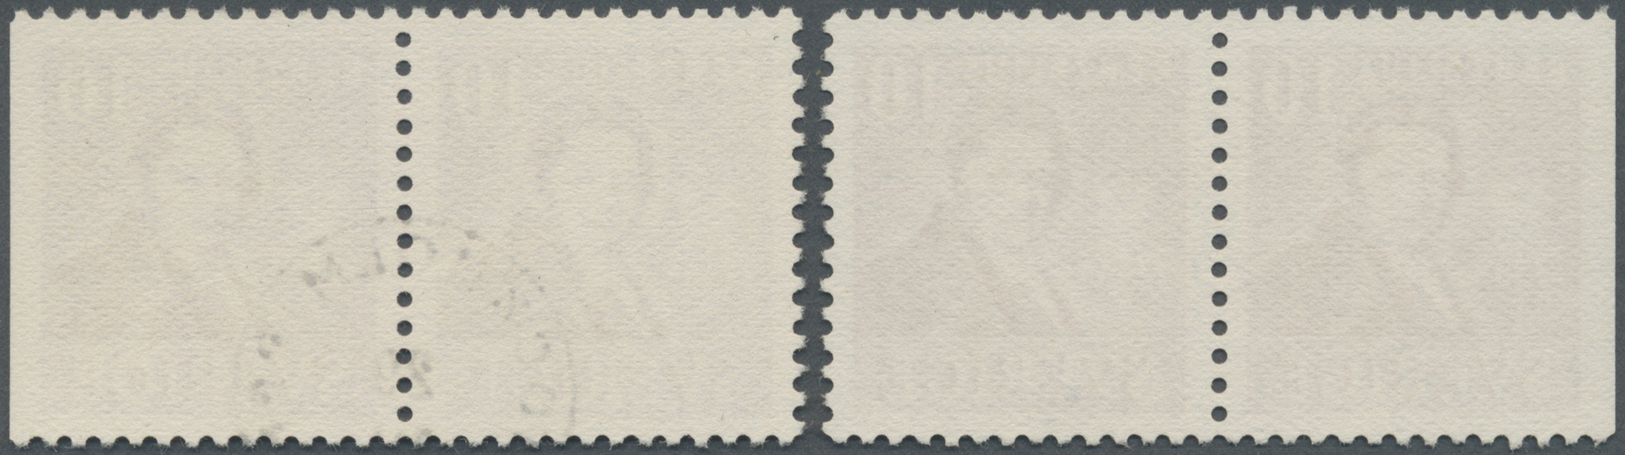 O Schweden: 1939, 10 Ö Violet In Two Pairs Used, Four-sided Perf/right Imperf And Left Imperf/right Four-sided P - Neufs